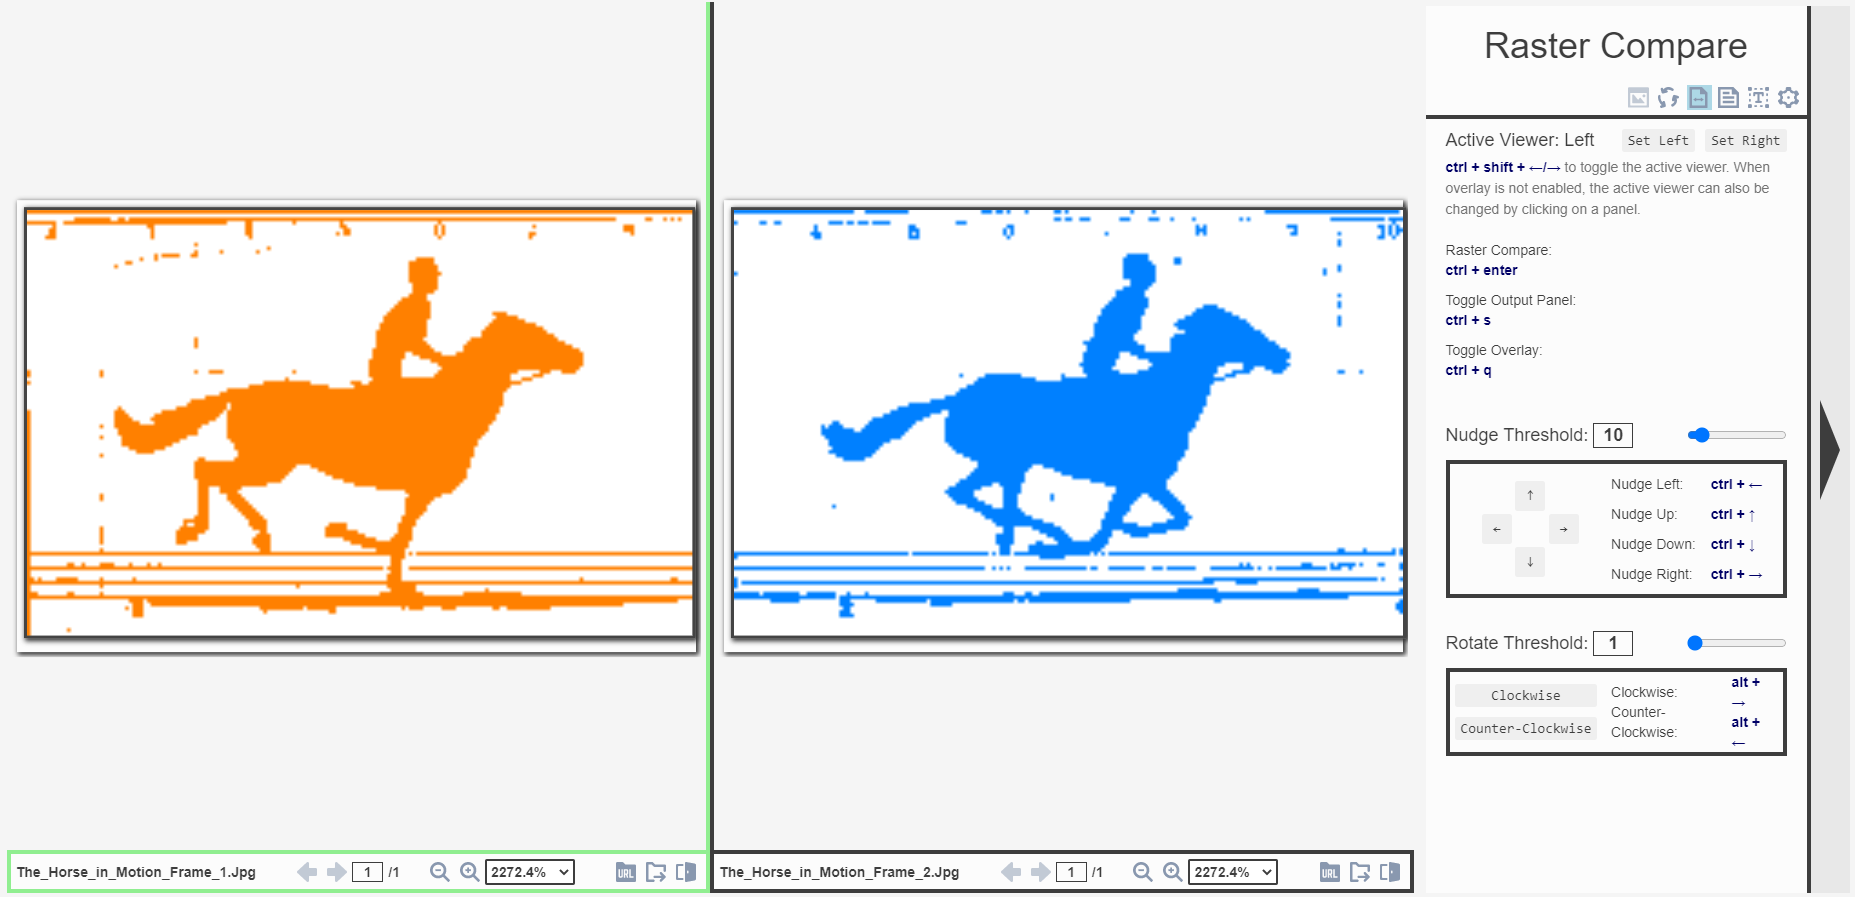 HorseInMotionFrames1And2